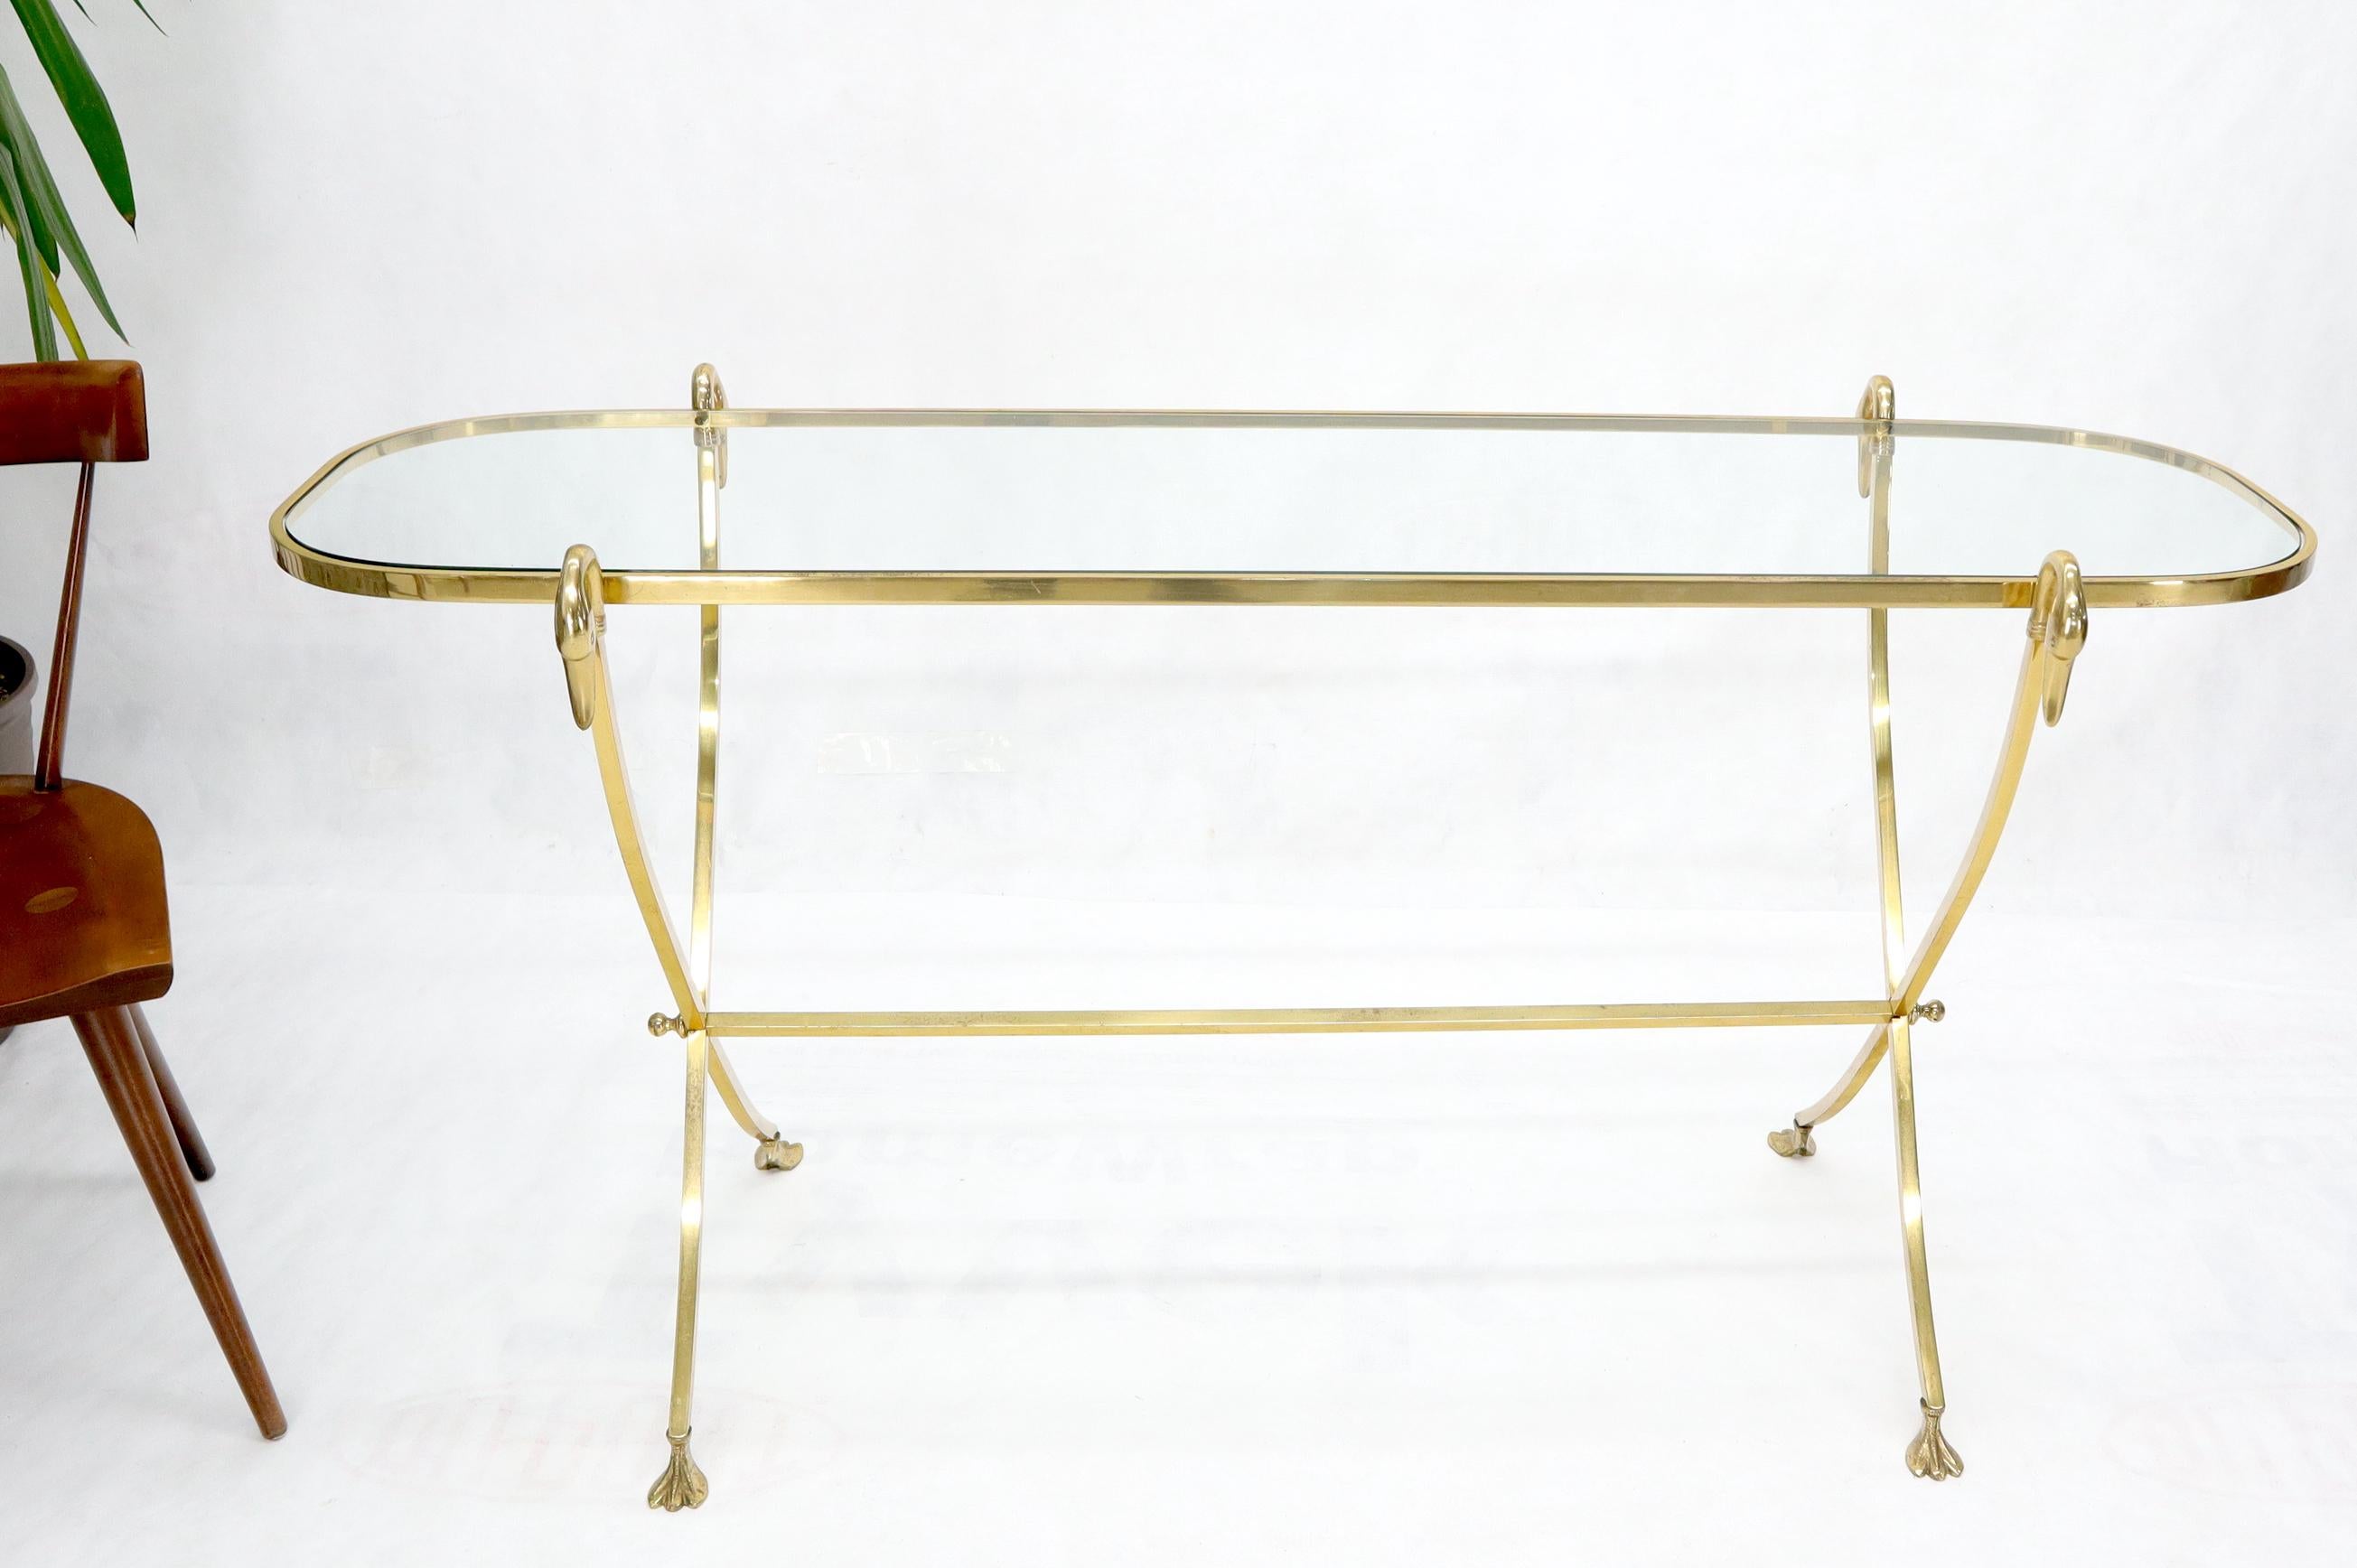 Stunning solid brass glass top console table with swan heads finials on X-base.